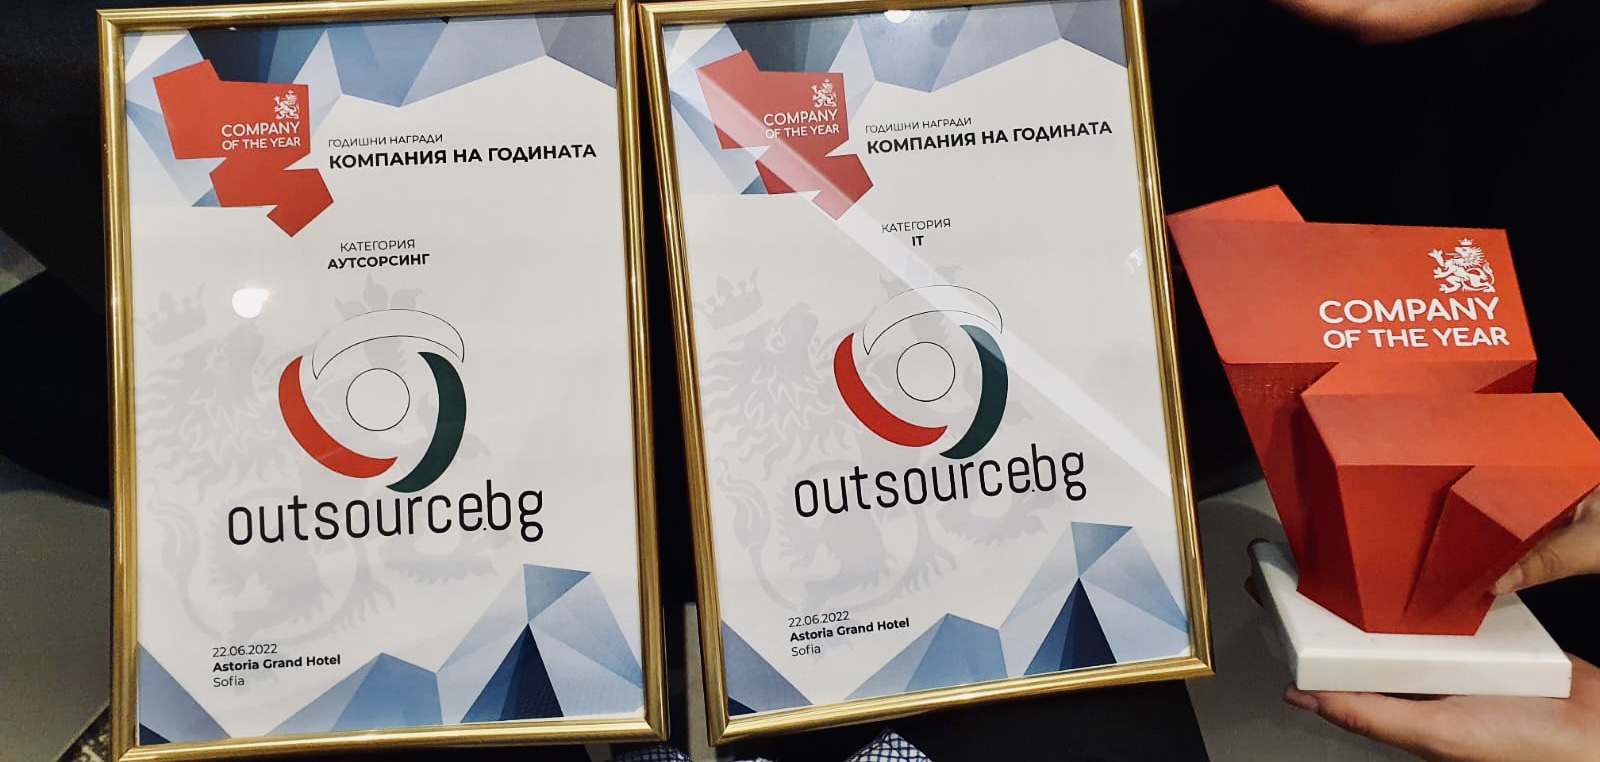 OutsourceBG Services Ltd nominated company of the year for 